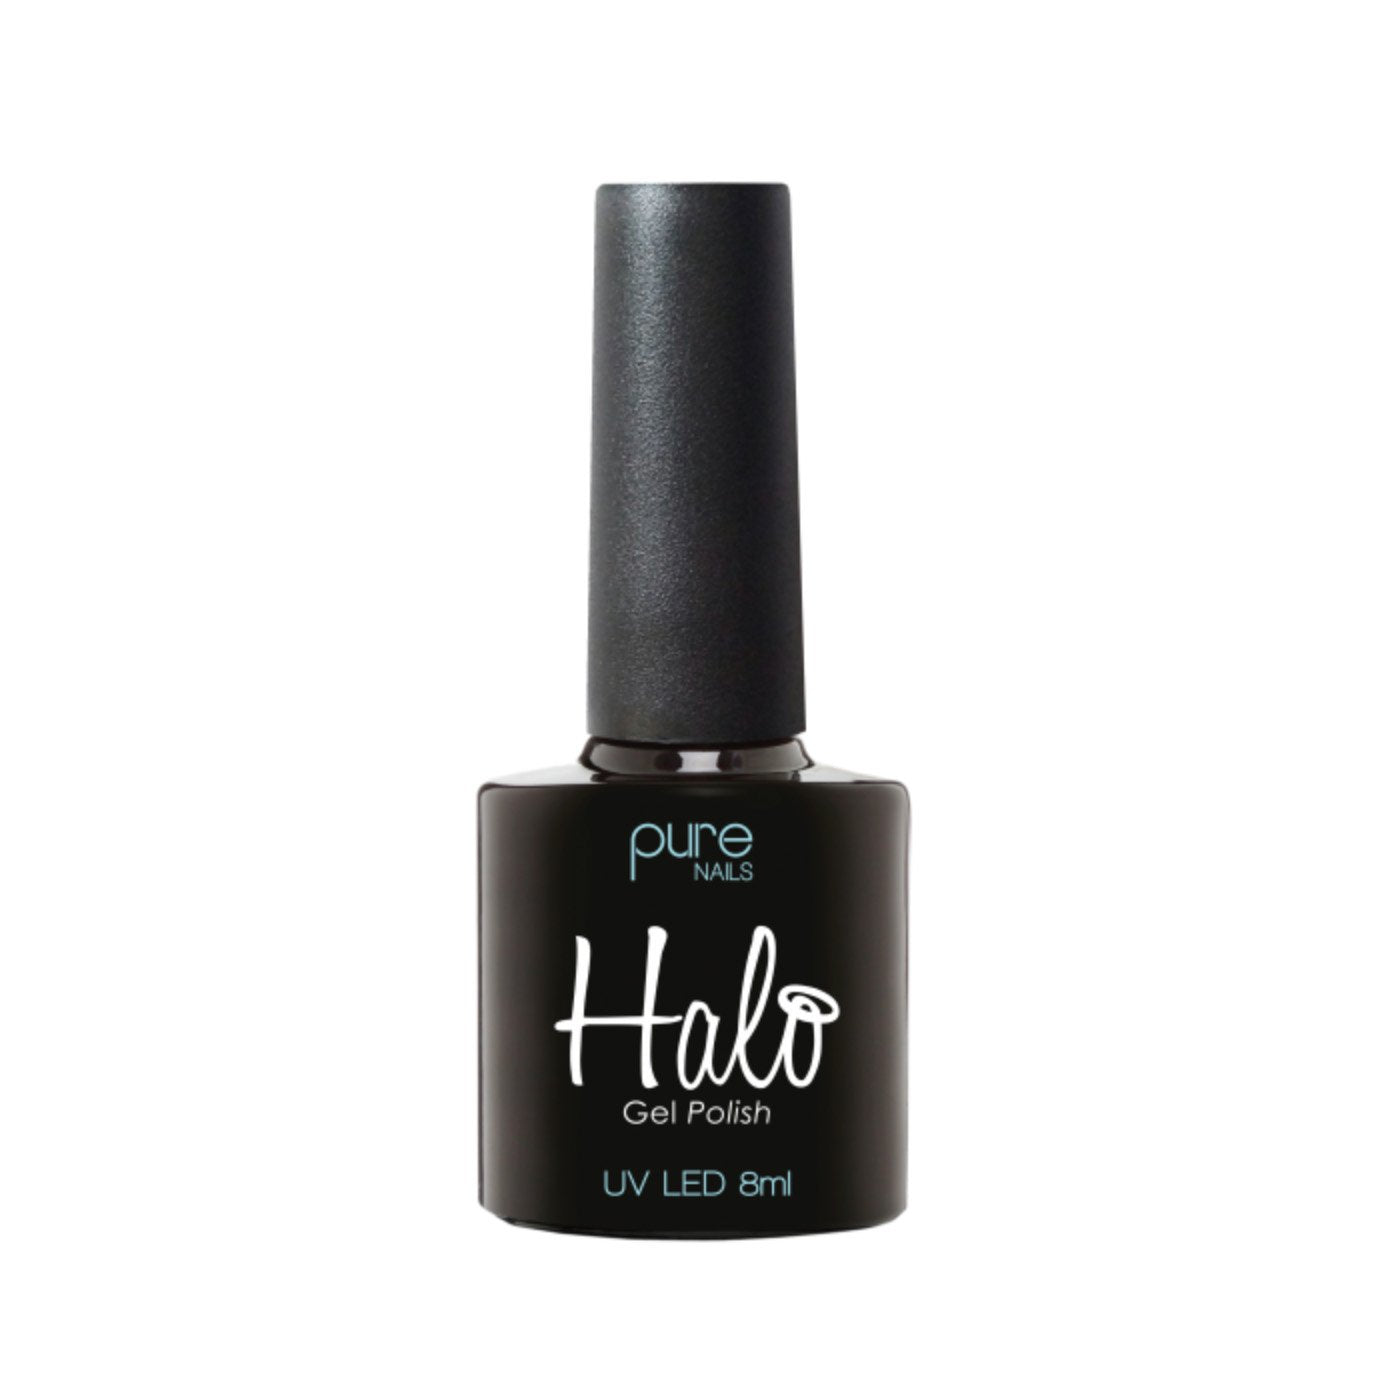 Halo Gel Polish - Non-wipe Matte Top Coat (8ml) - Ultimate Hair and Beauty